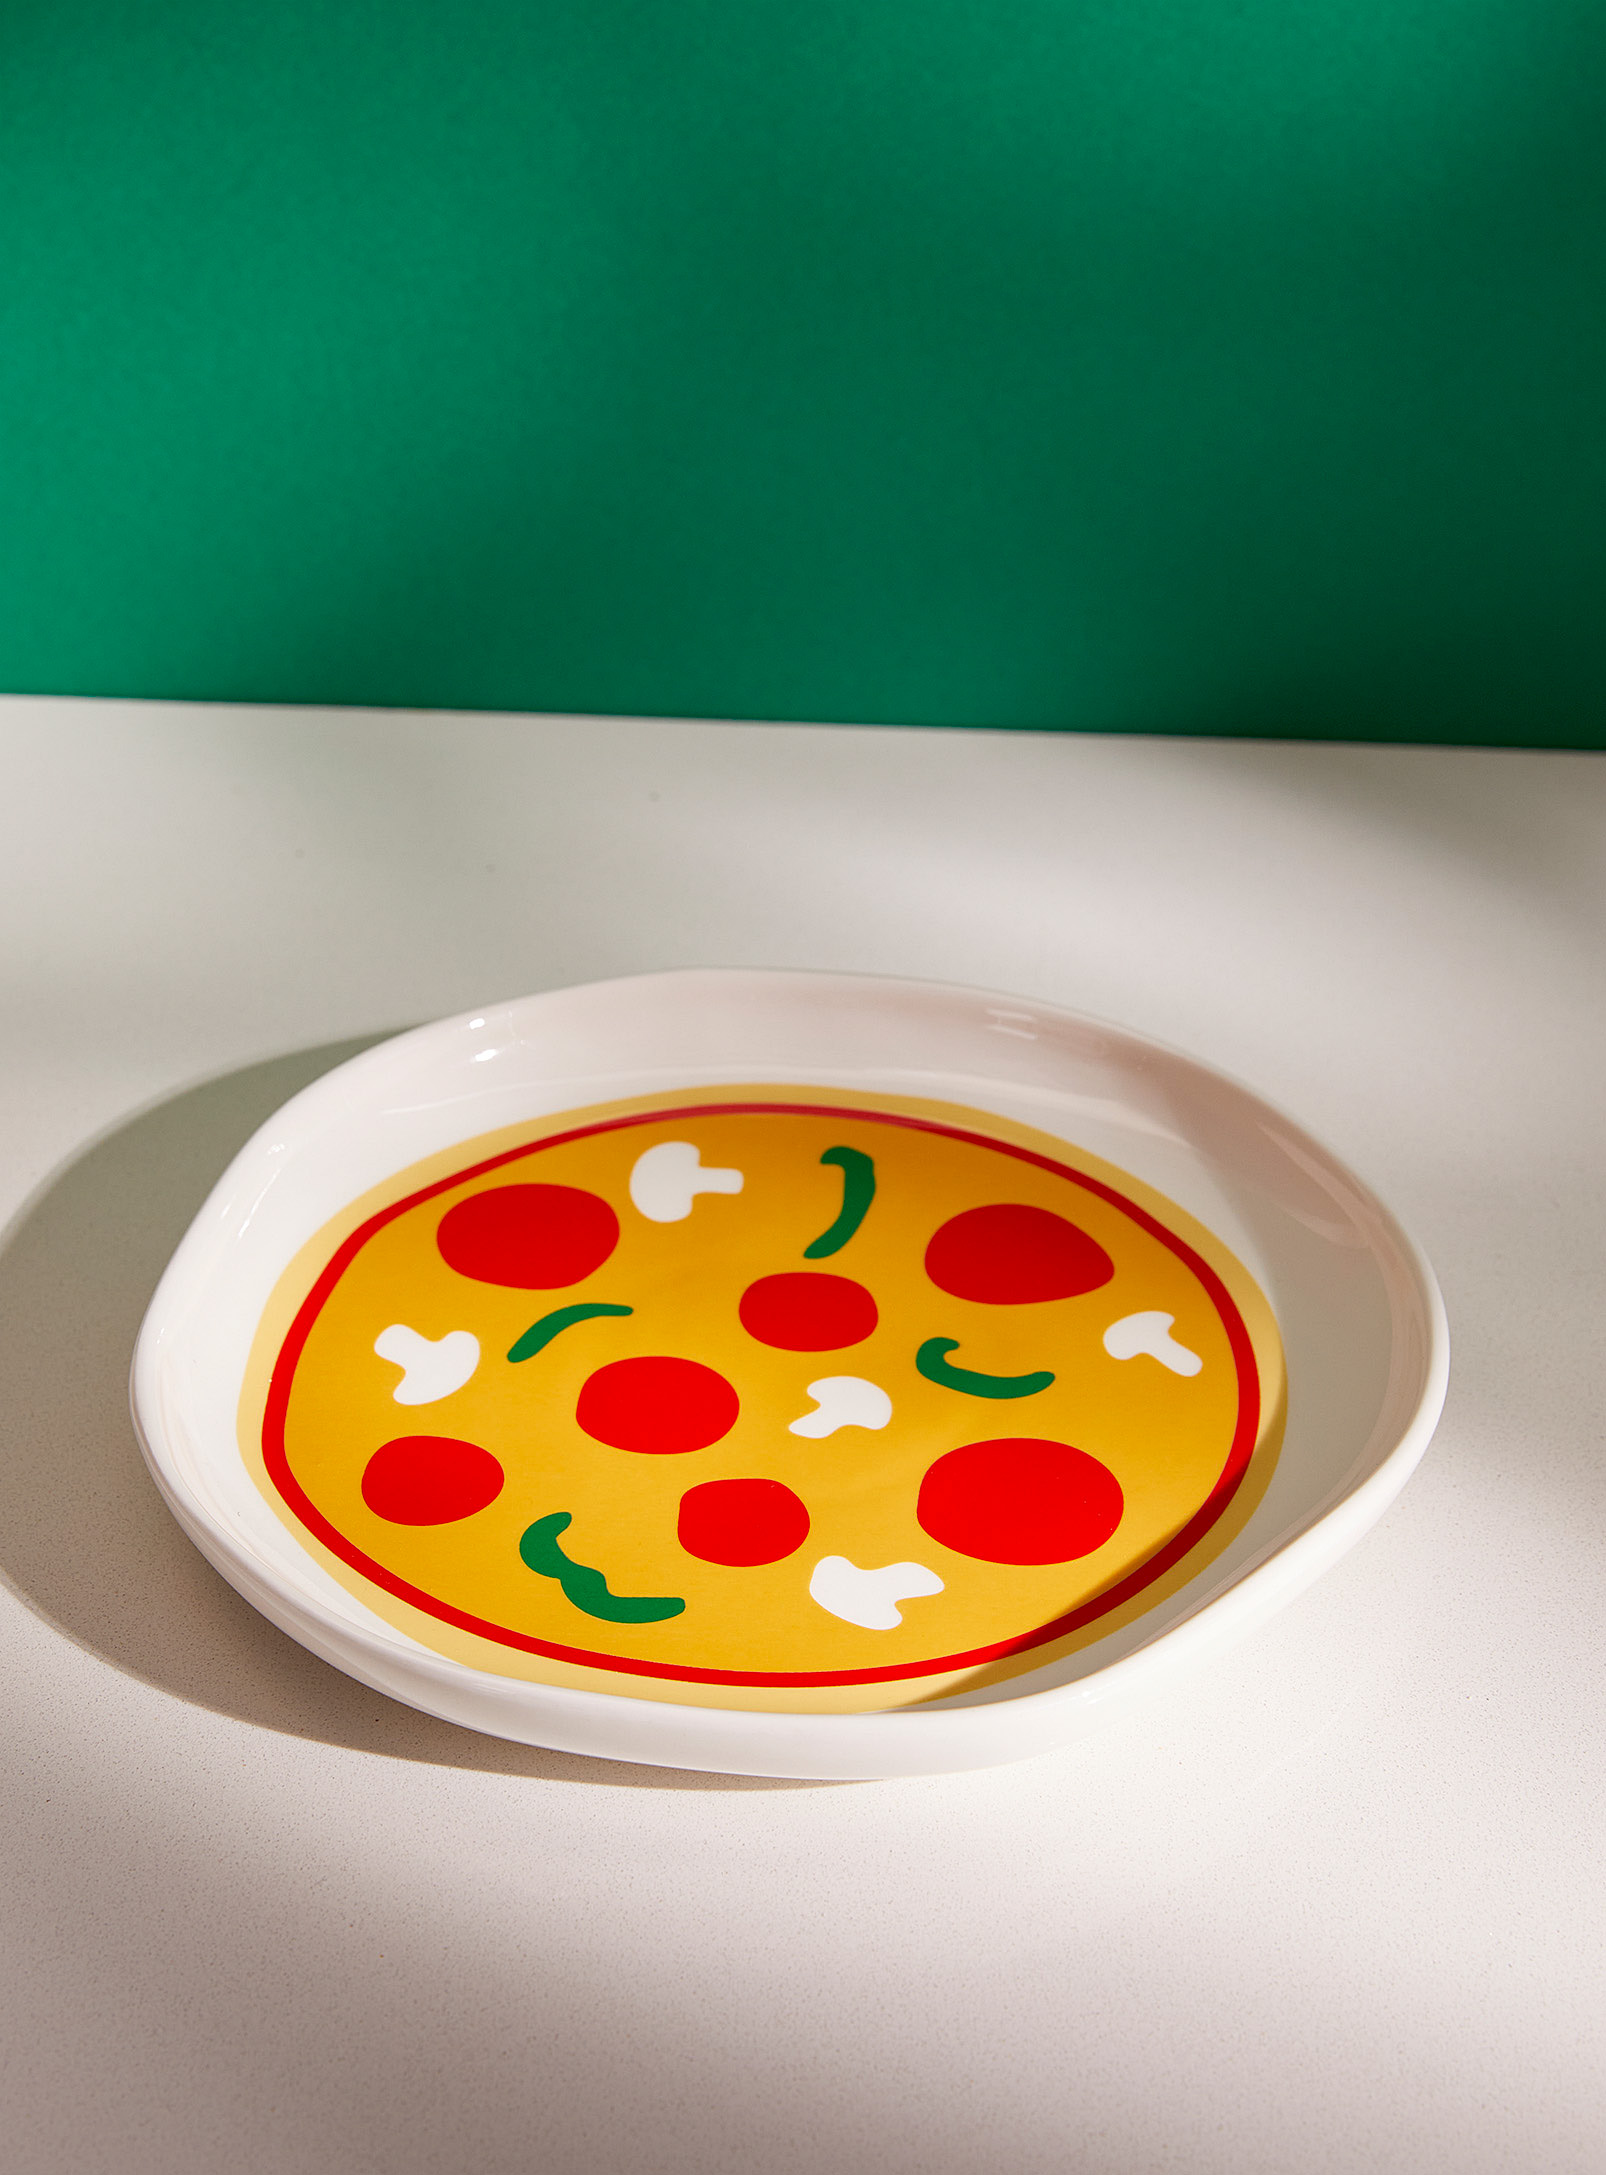 Simons Maison - All-dressed pizza plate